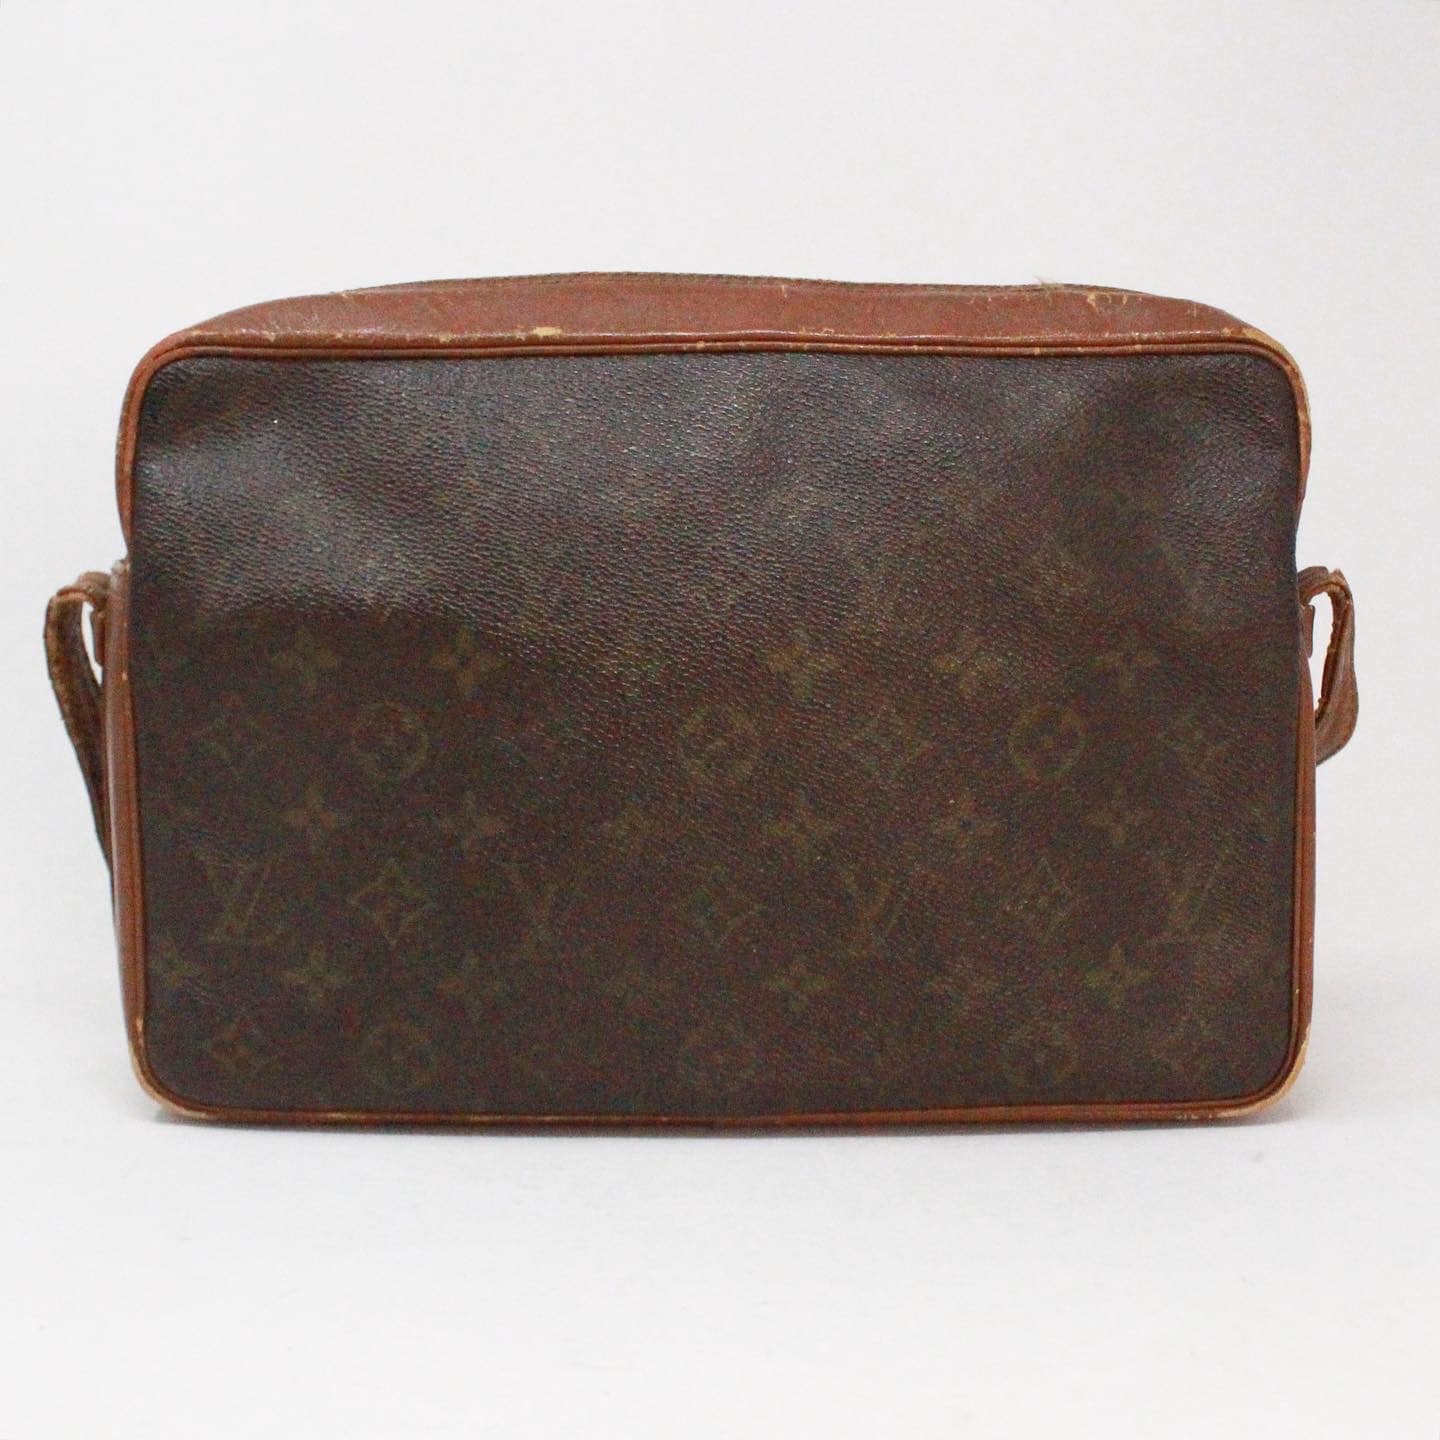 Bandoulière Bag Strap Monogram Canvas - Wallets and Small Leather